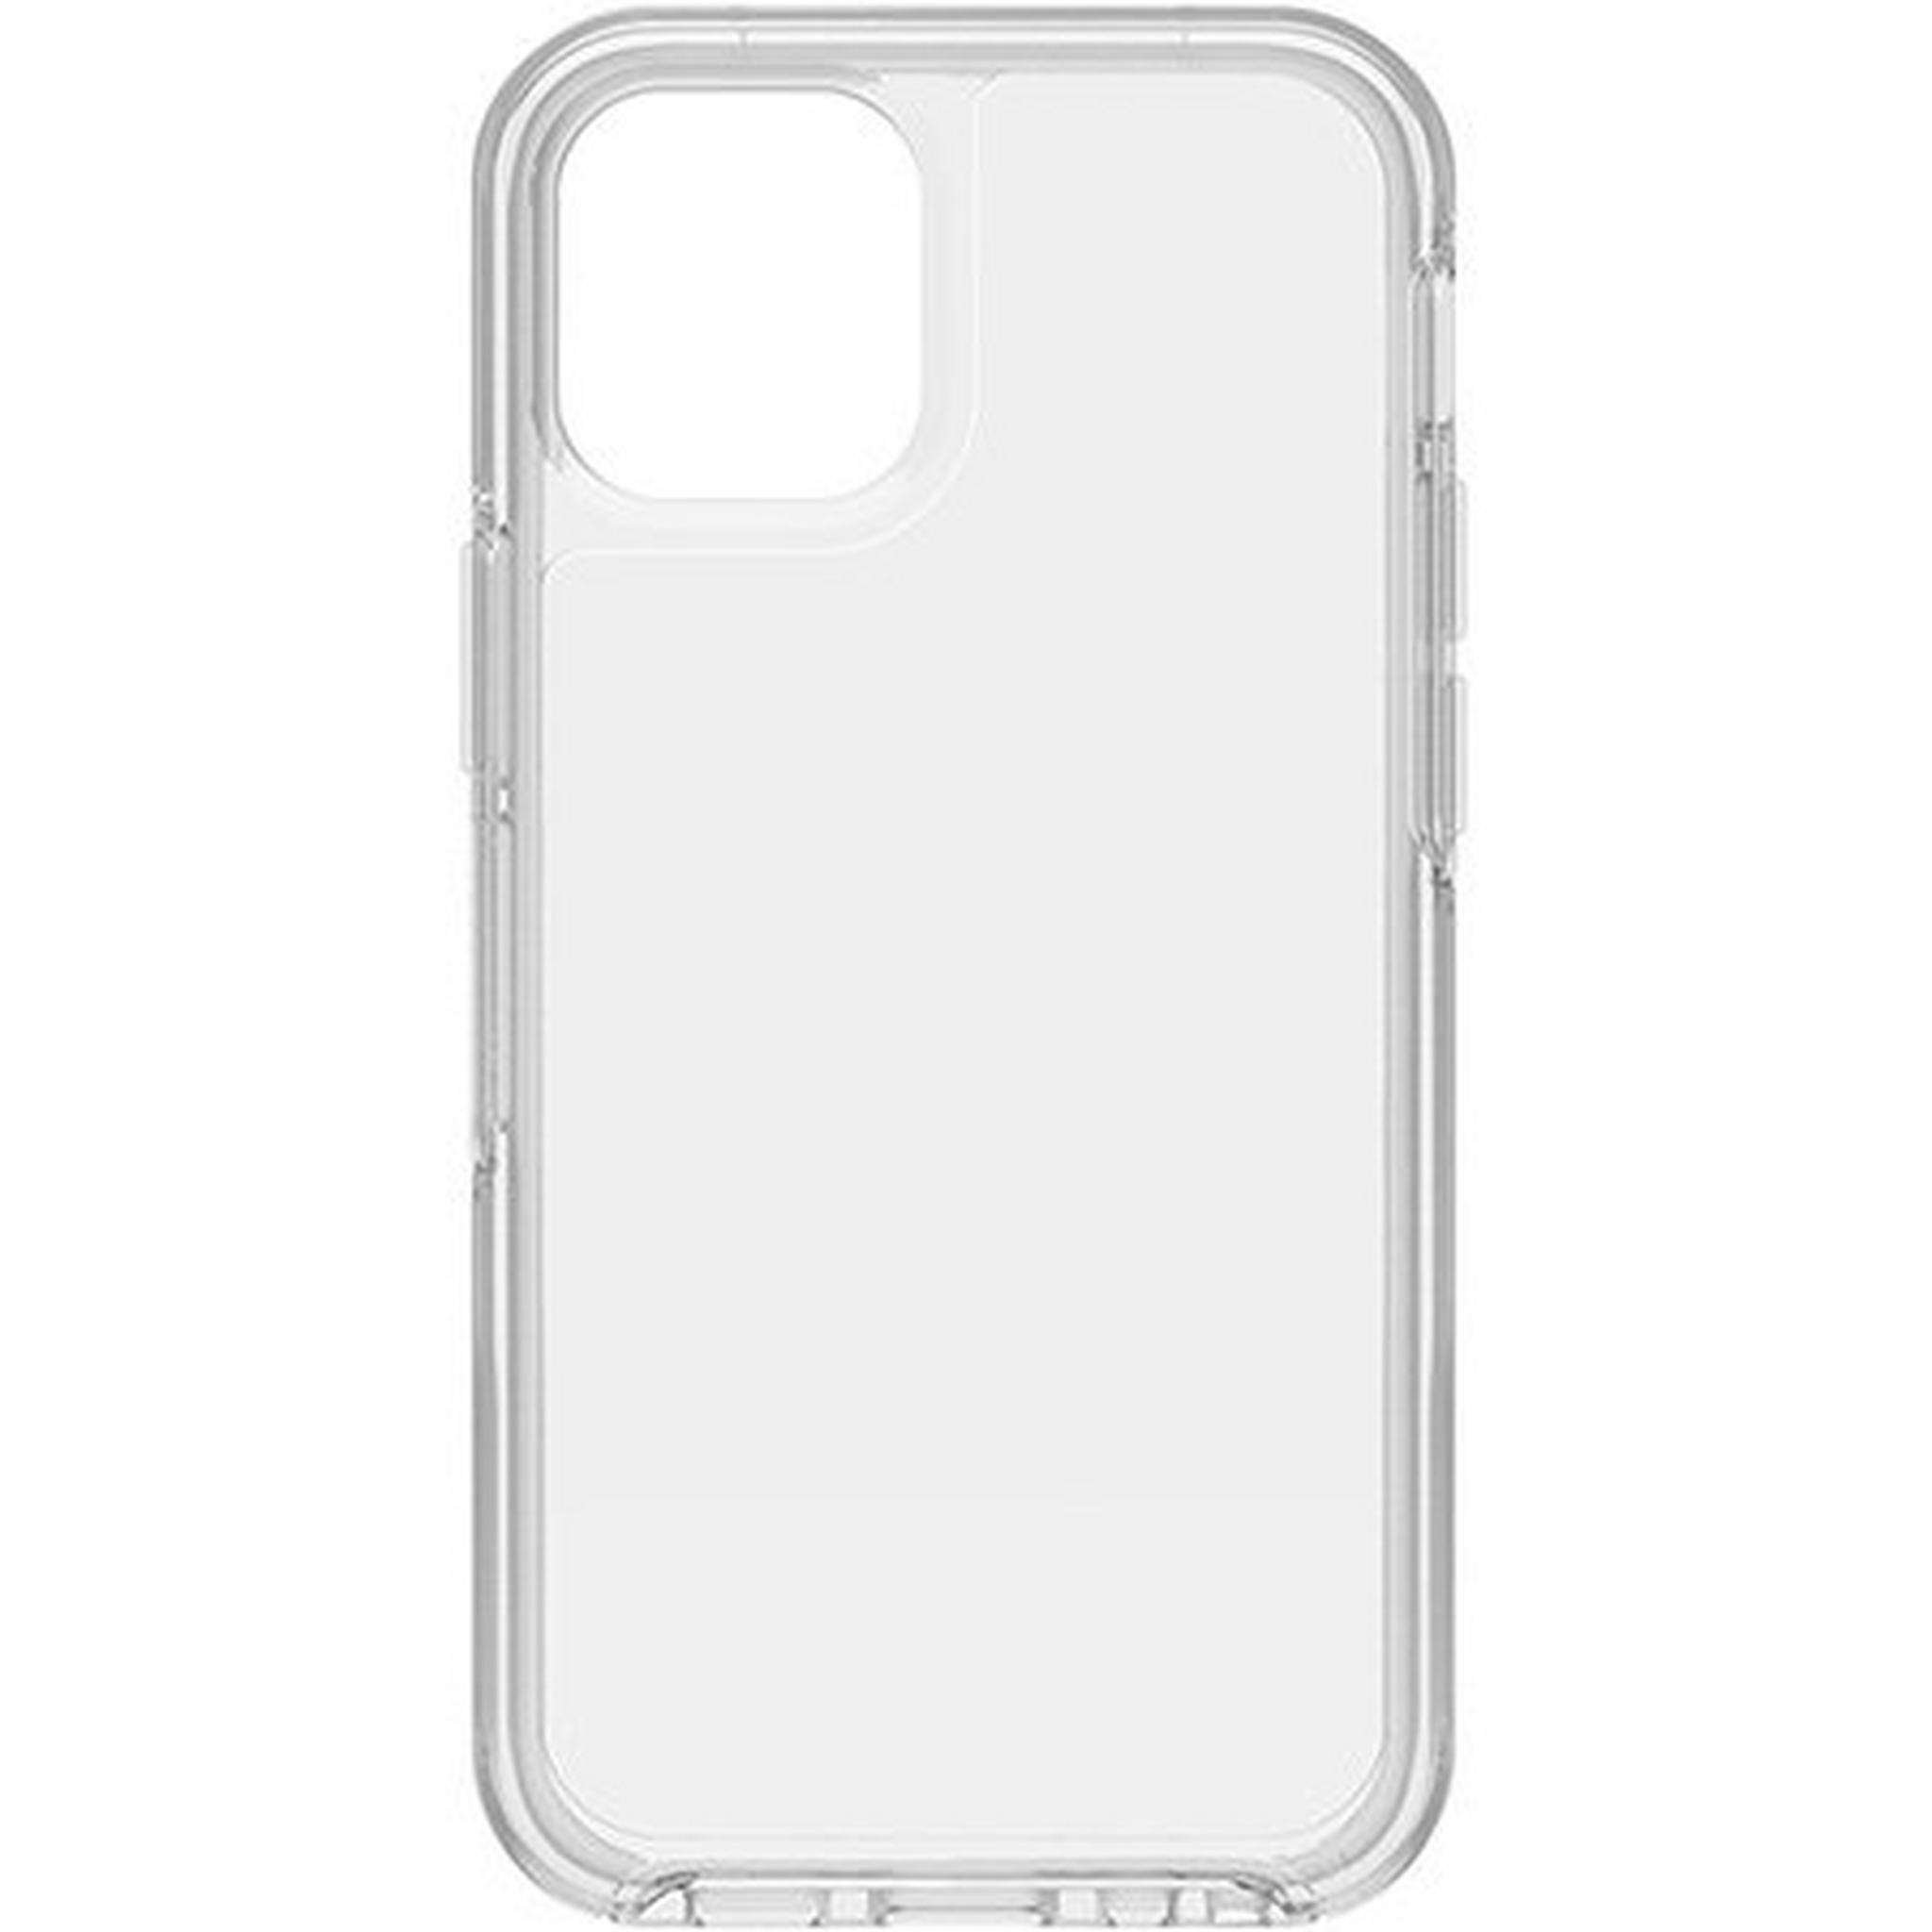 Otterbox Symmetry Series iPhone 12 Mini Case - Clear